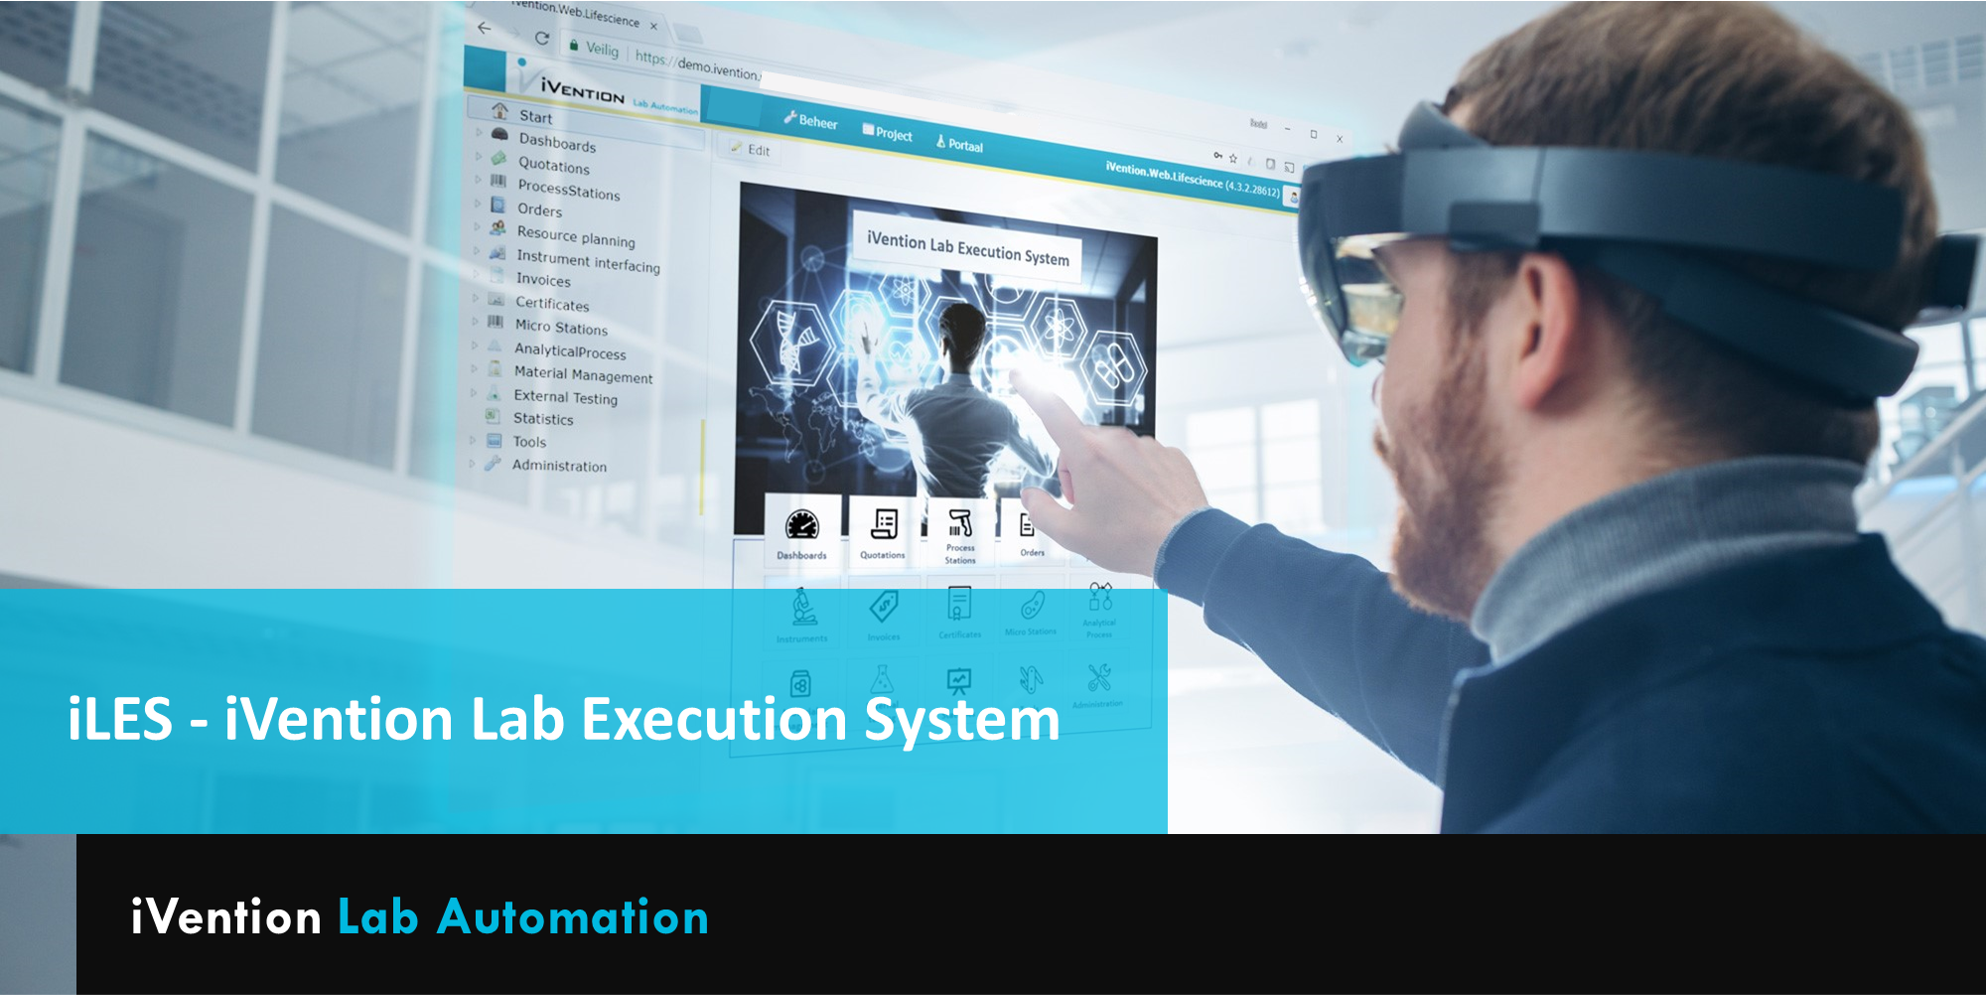 Image - iLES - iVention Lab Execution System